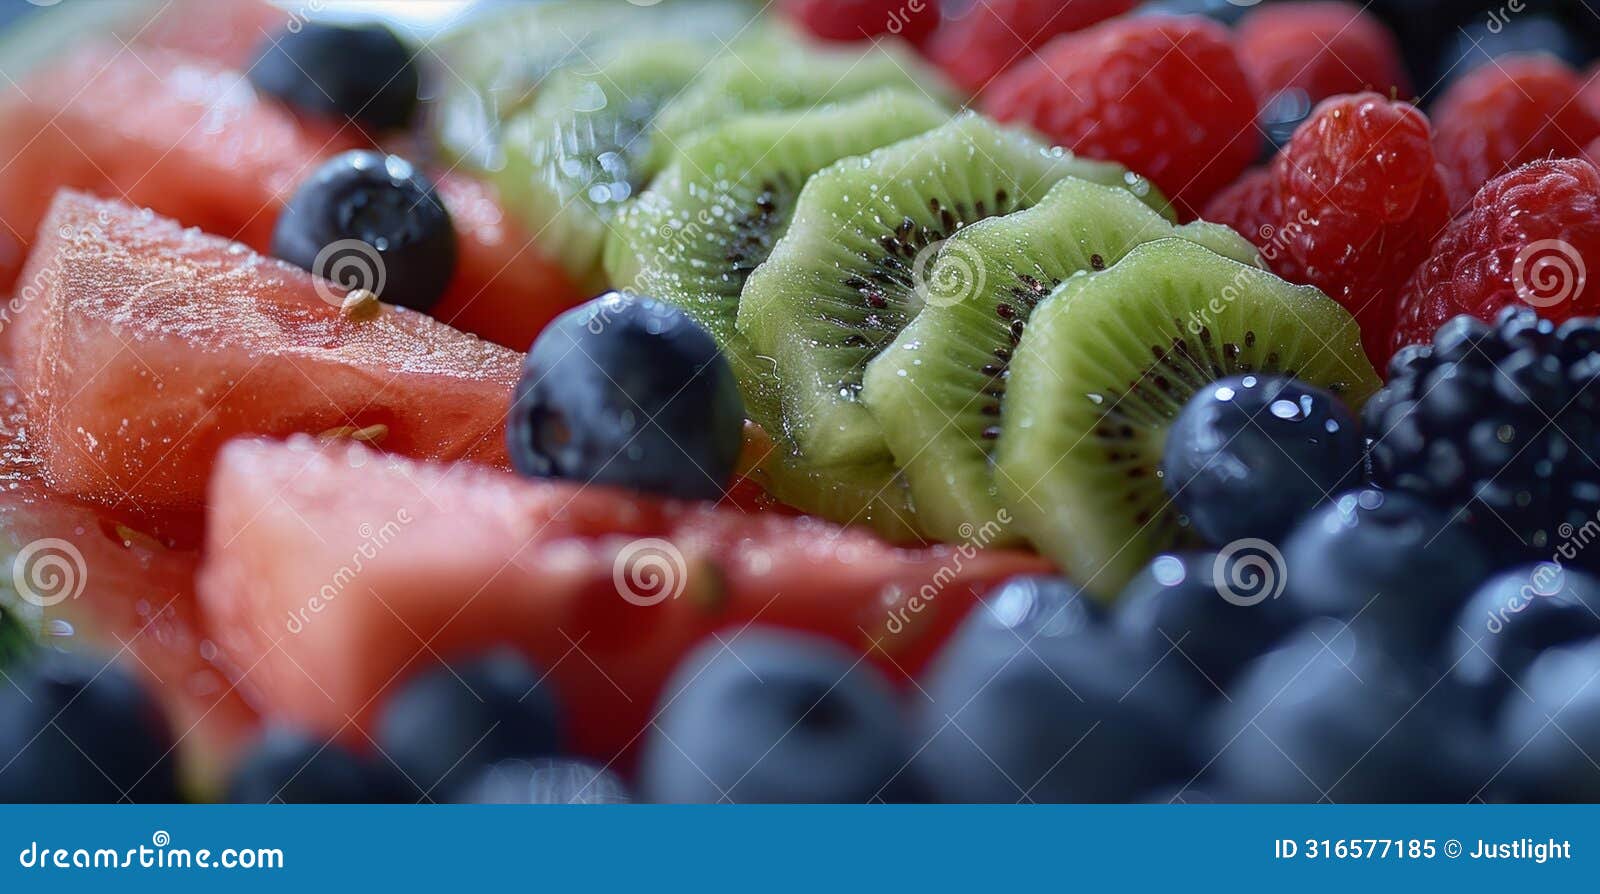 closeup of a colorful fruit platter featuring fresh berries juicy watermelon and sliced kiwi served at a sober sunday